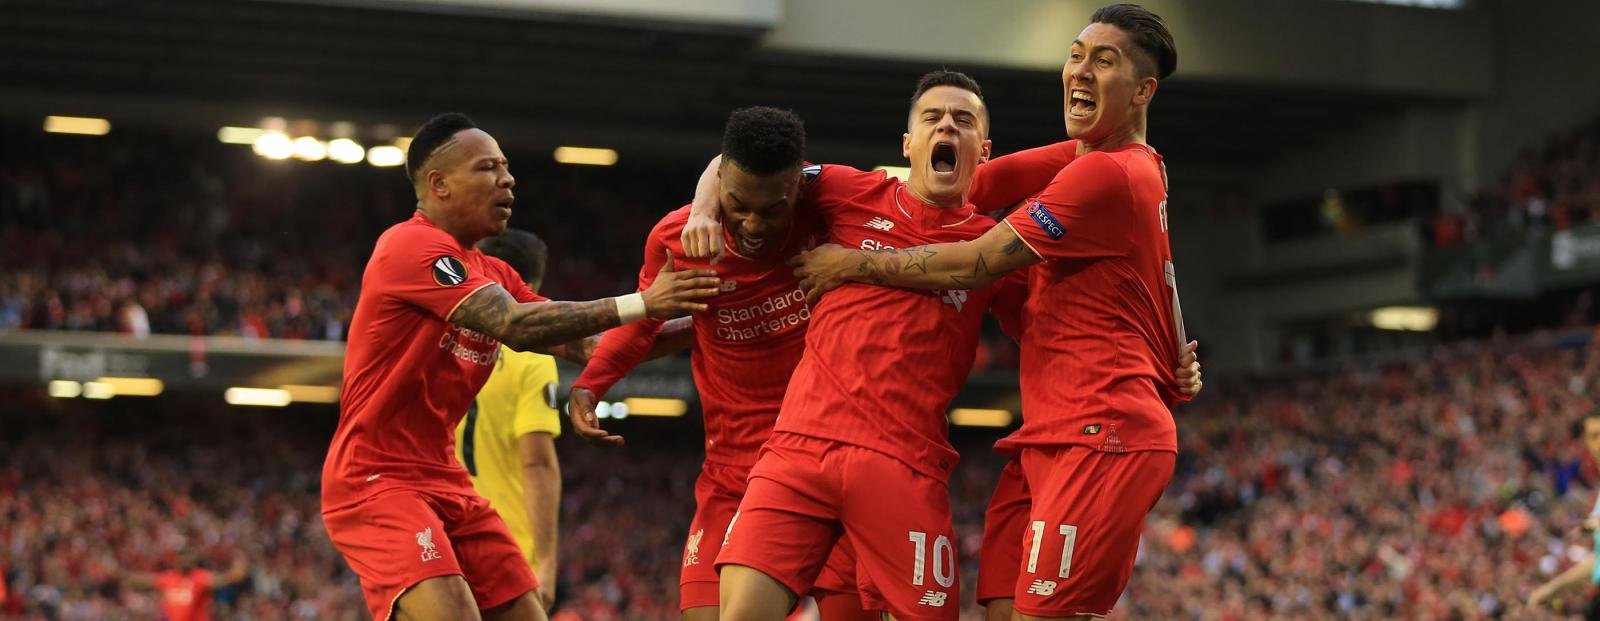 Europa League Semi-Finals Round-Up: Liverpool see off Villarreal & will face Sevilla in the final